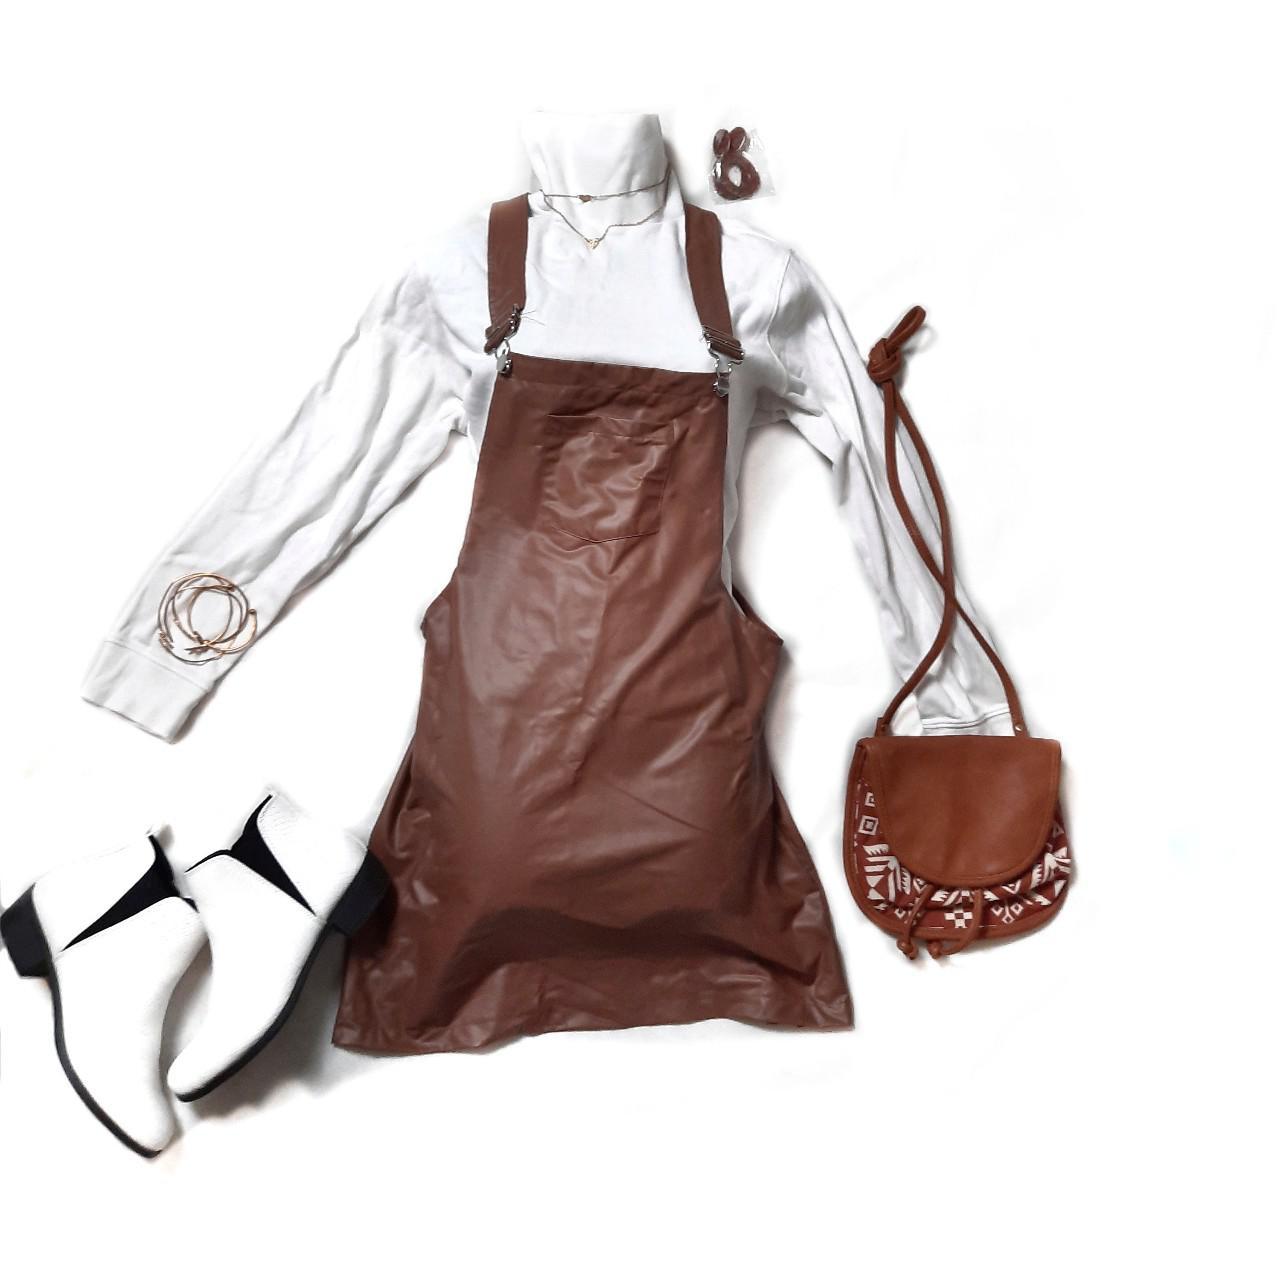 Product Image 1 - Fall Brown
*
White turtleneck, size M/L
Brown